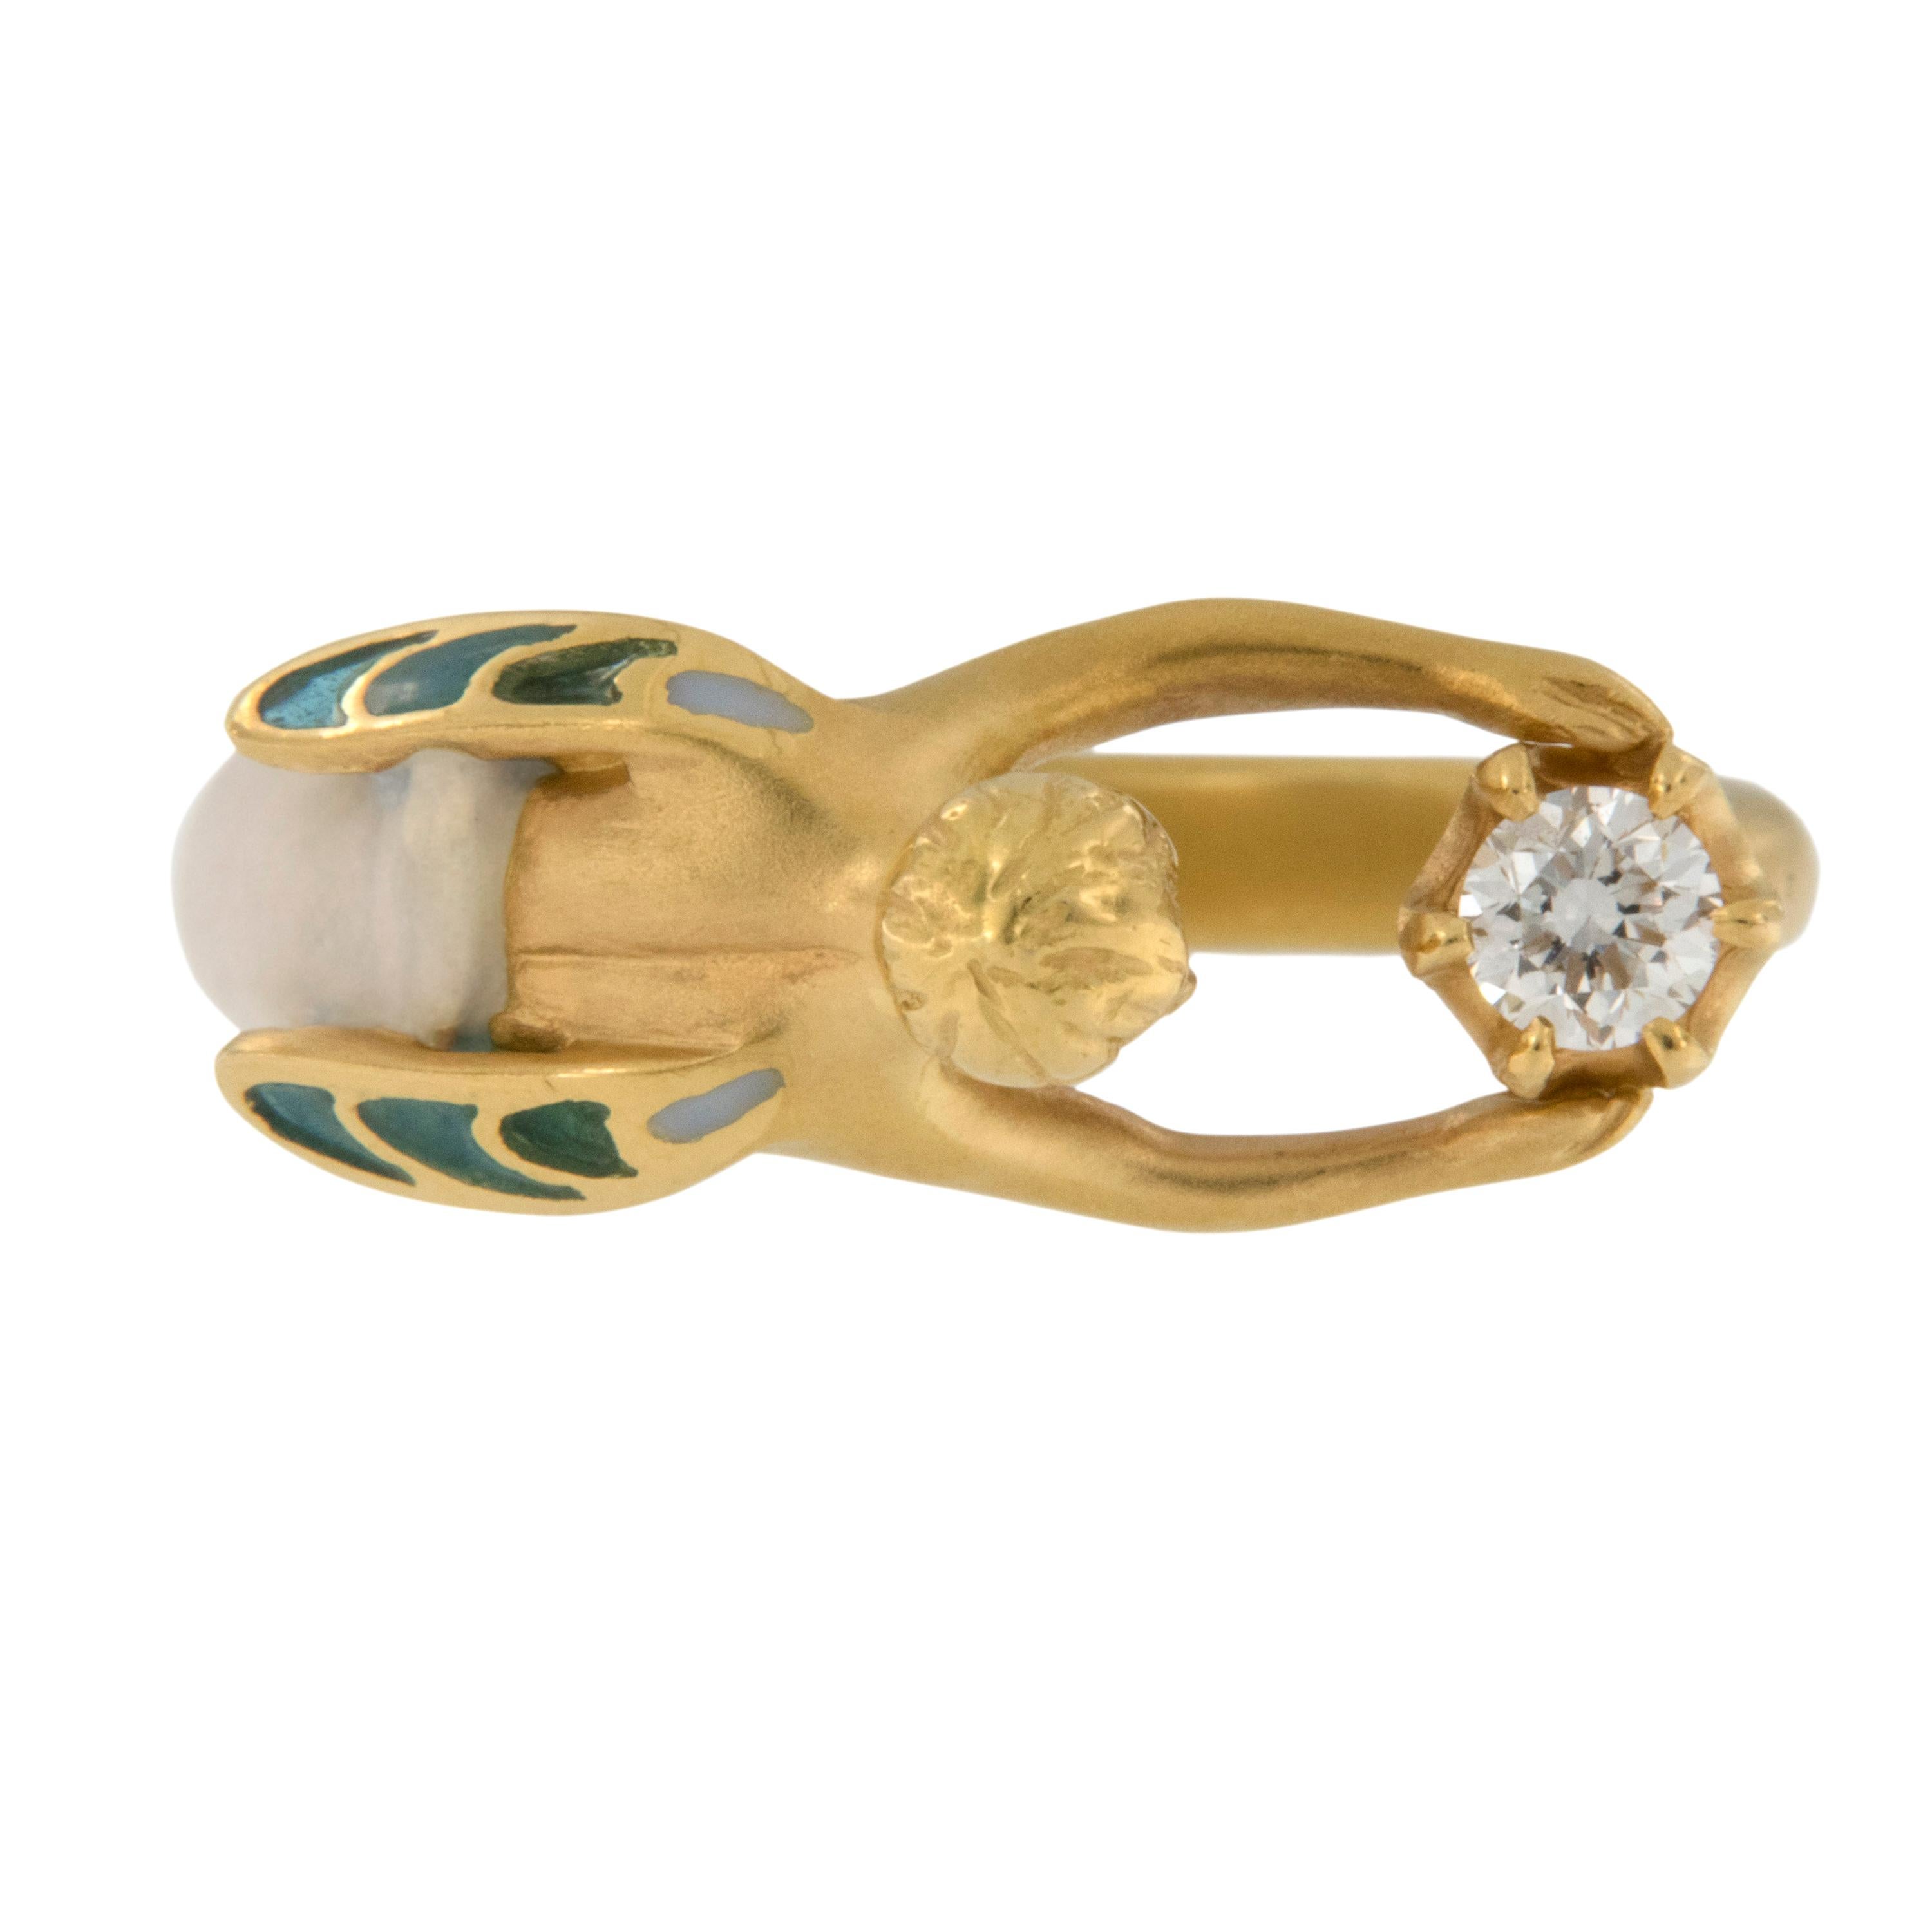 Masriera is a company world-renowned for their amazing enamel work & Art Nouveau reproductions. This 18kt yellow gold Angel Of The Morning
 ring with “plique-à-jour” and “basse taille” fired enamel depicts an angel holding up a brilliant cut diamond